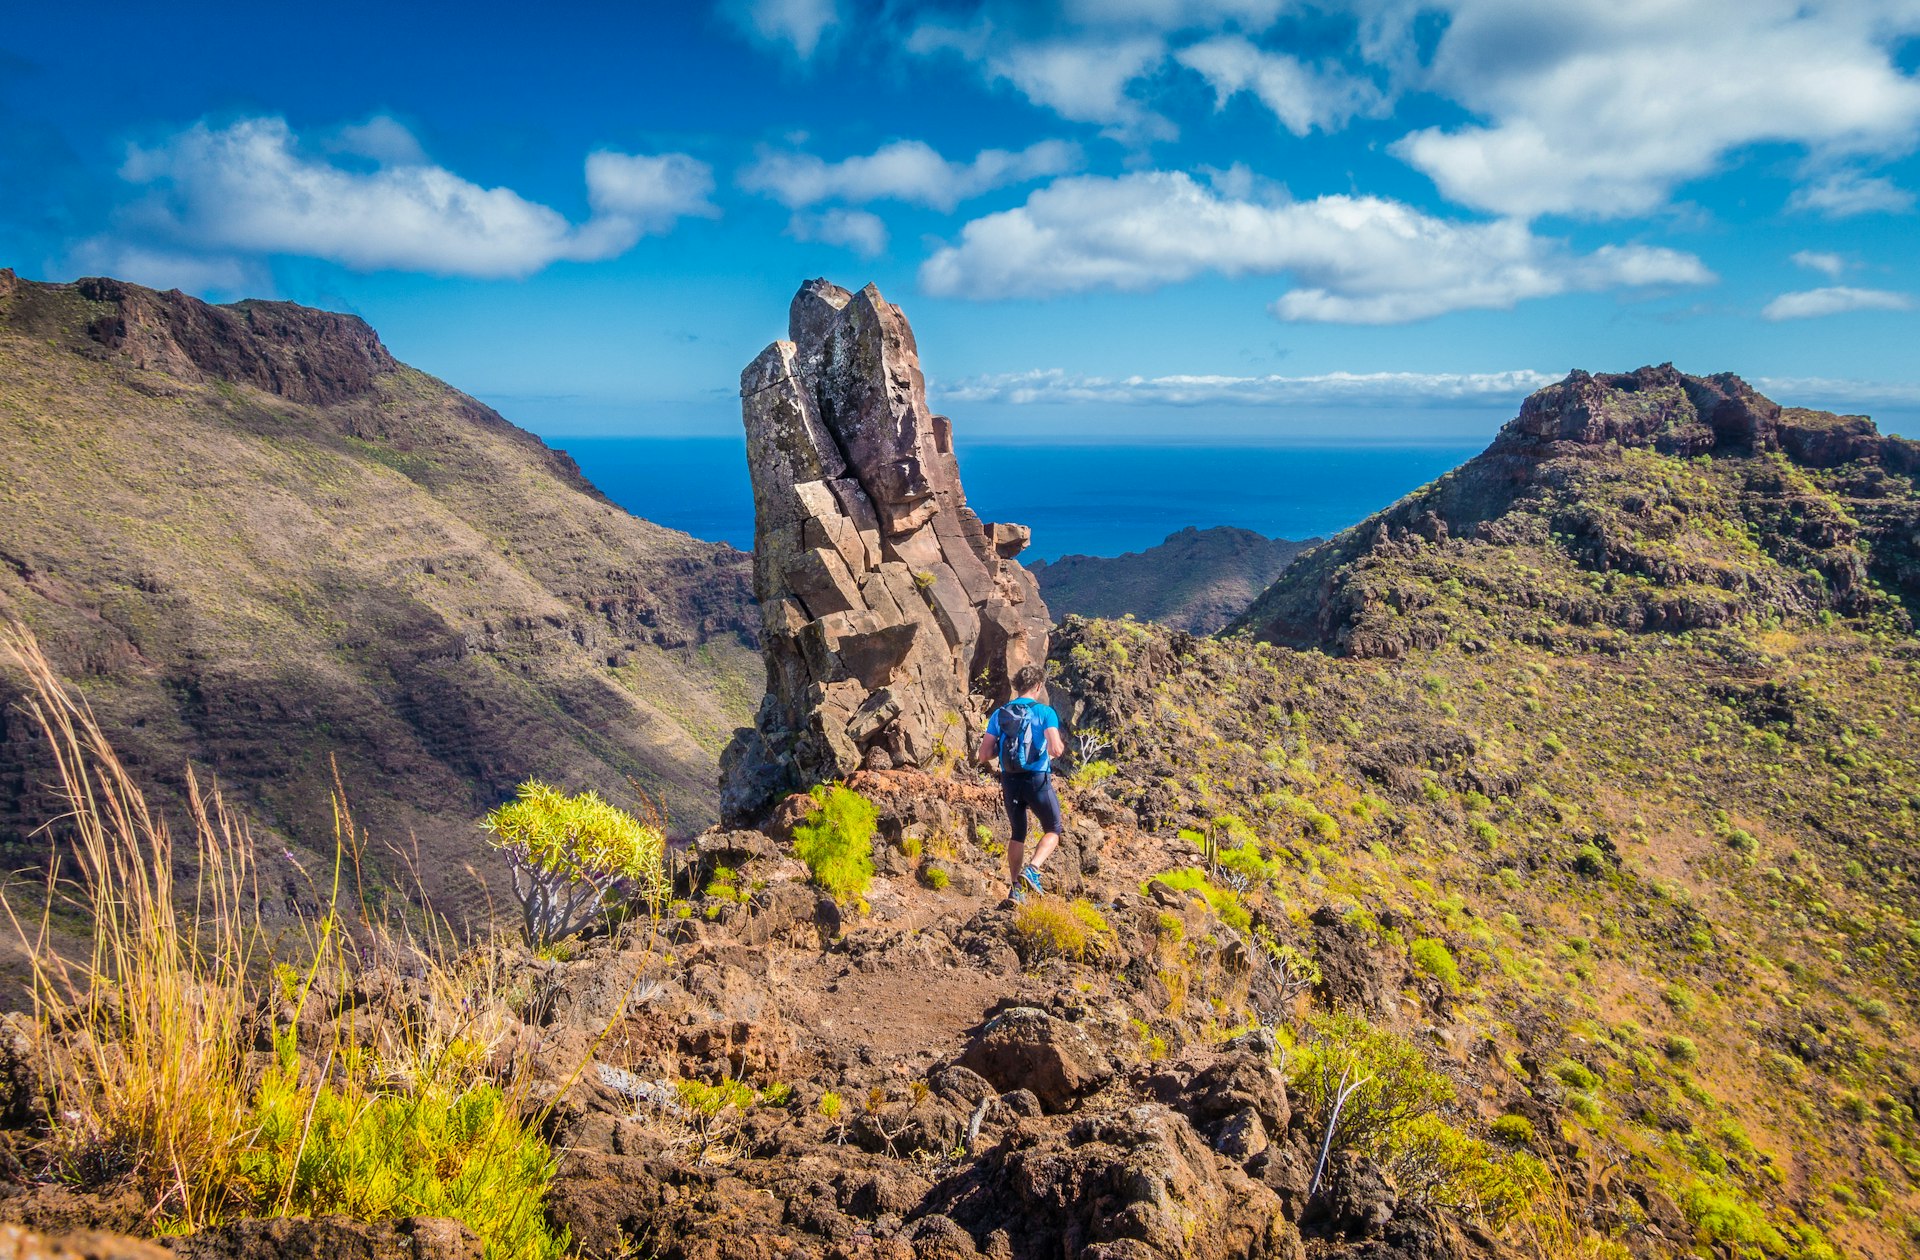 A hiker on a remote trail through rocky formations with the sea in the distance in the Canary Islands